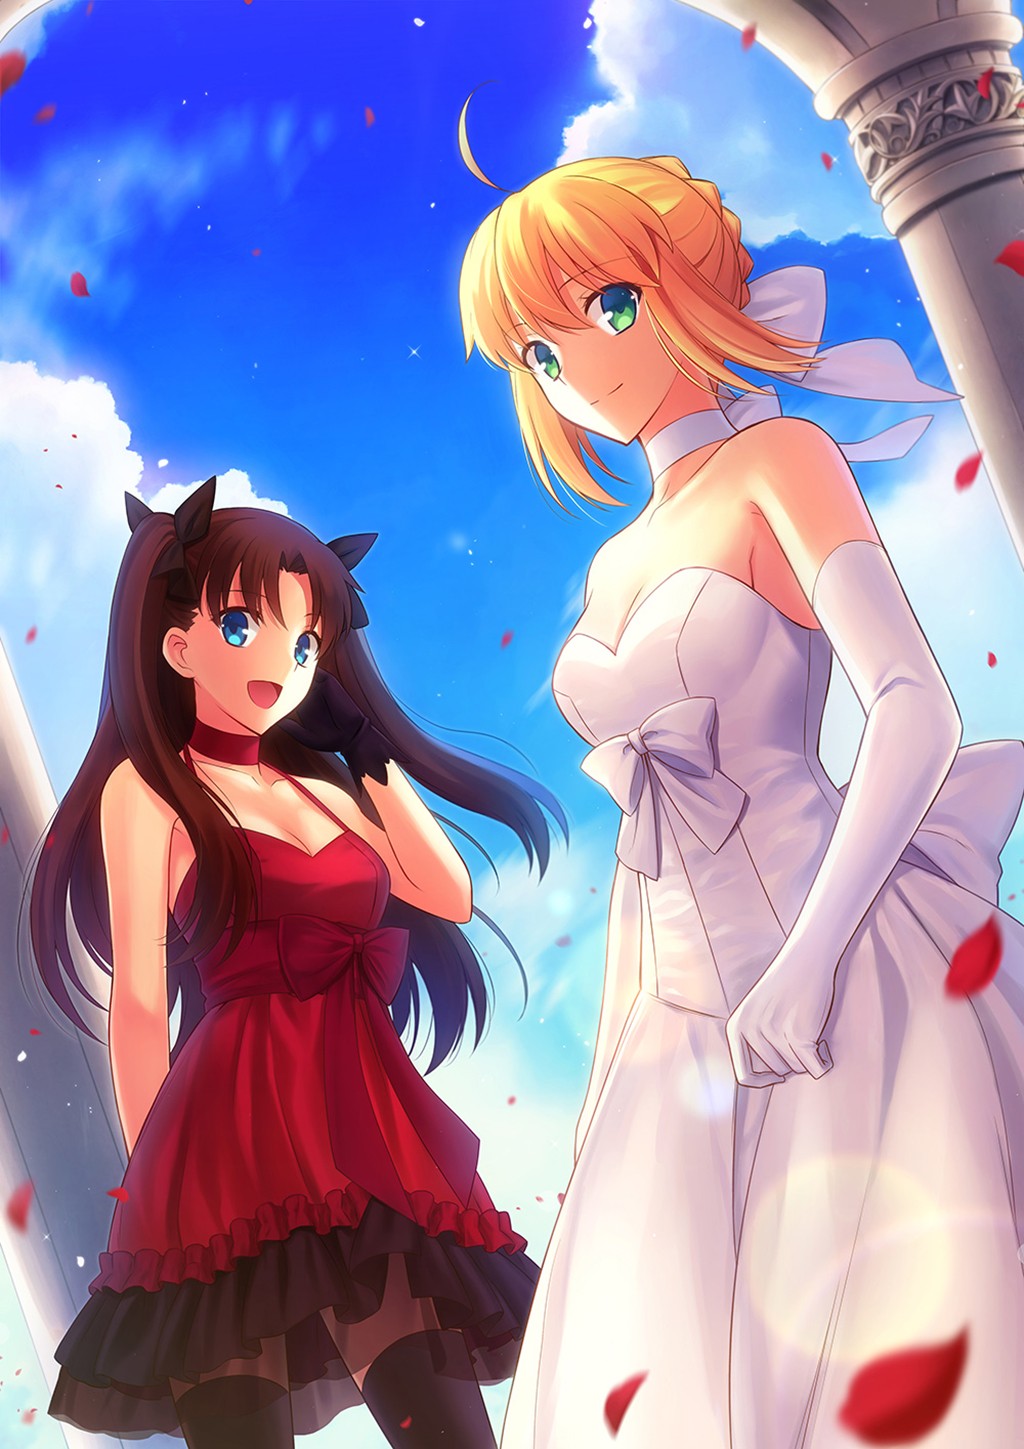 Anime 1024x1449 Fate series Tohsaka Rin anime girls Fate/Stay Night: Unlimited Blade Works Fate/Stay Night anime two women fantasy art fantasy girl